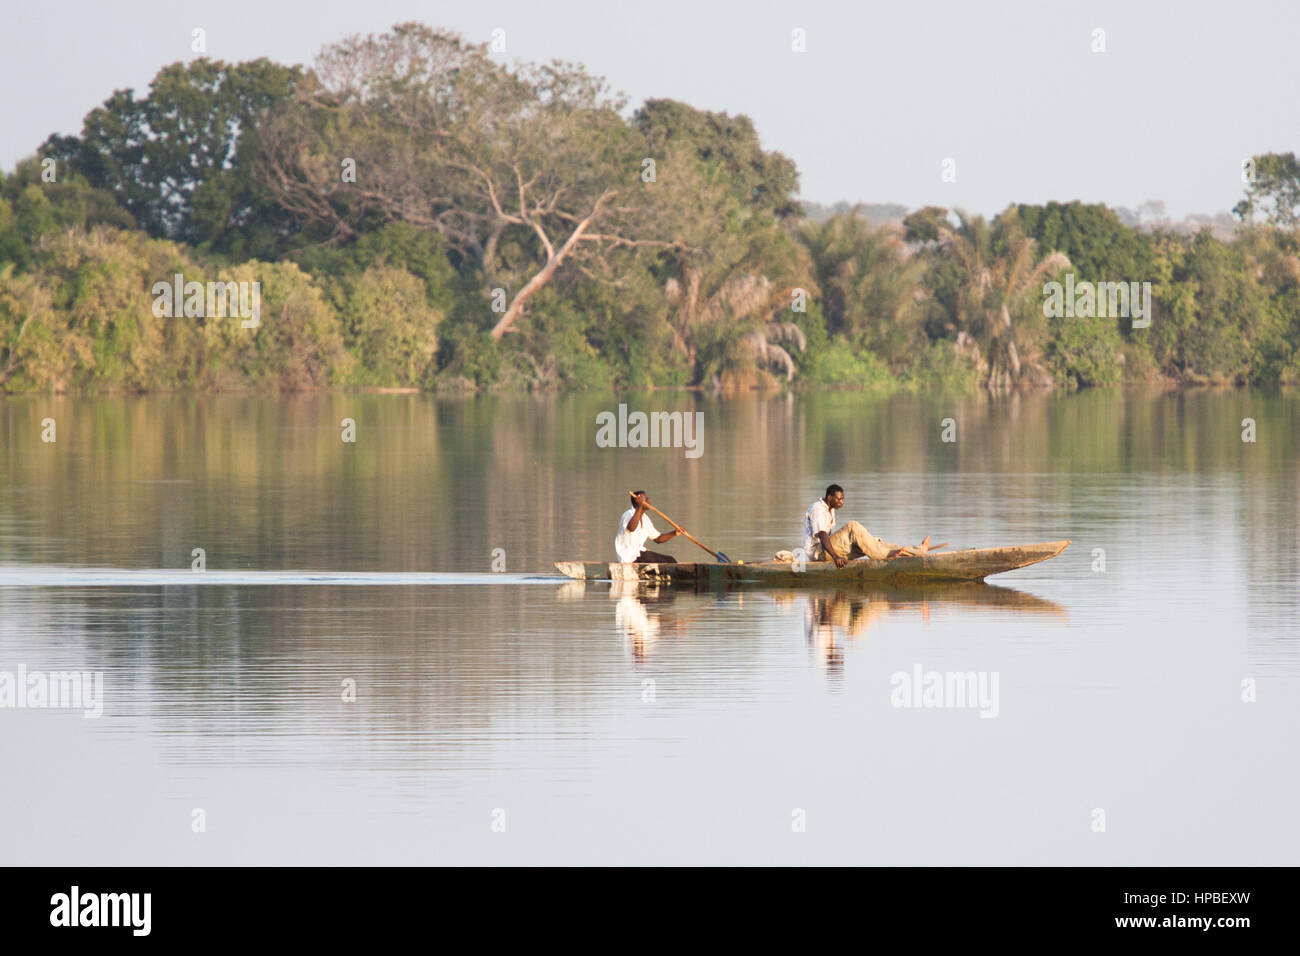 Locals fish with nets in a handcrafted dug out canoe on the River Gambia Stock Photo